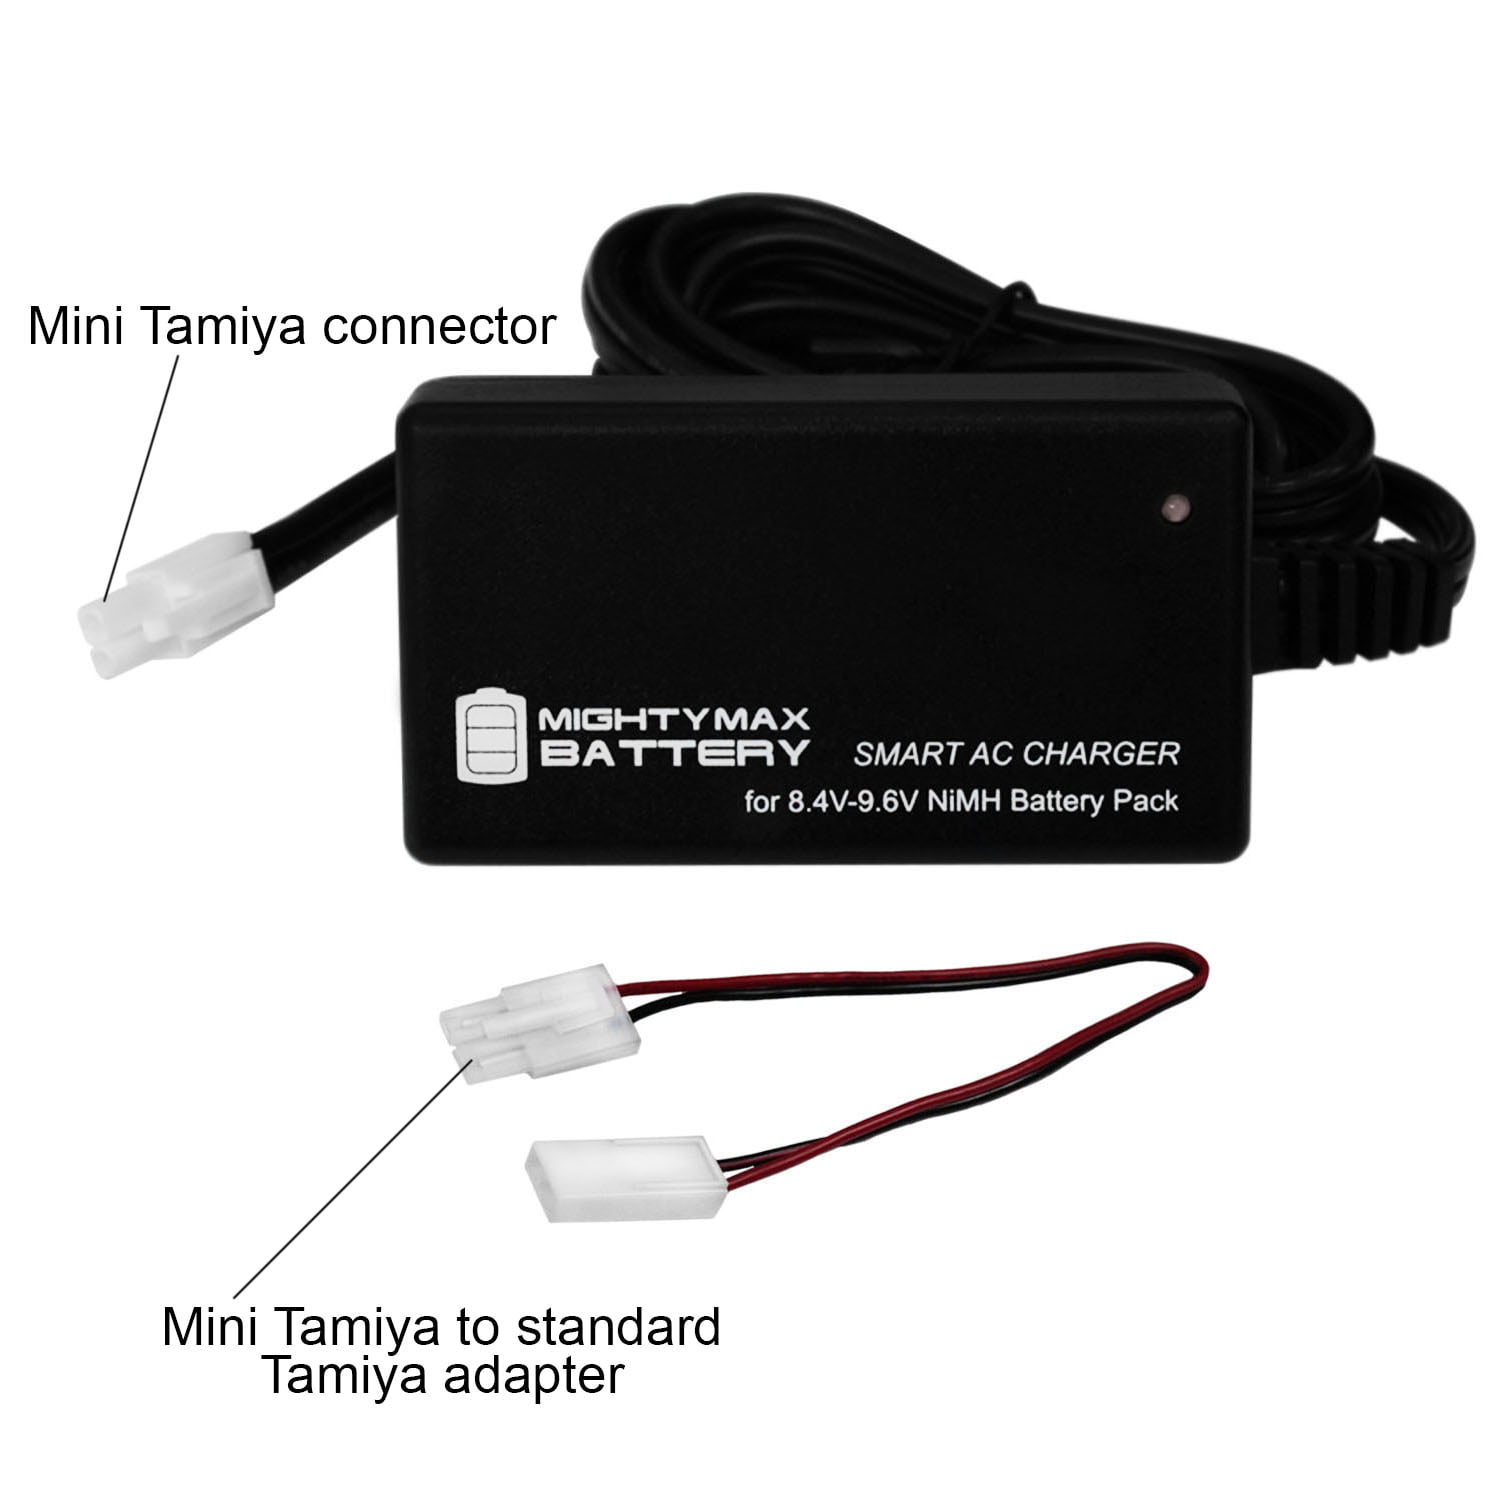 Mighty Max Battery 8.4V 1600mAh Butterfly Replaces CYMA Airsoft AK-74 AEG Rifle AK74M Brand Product 